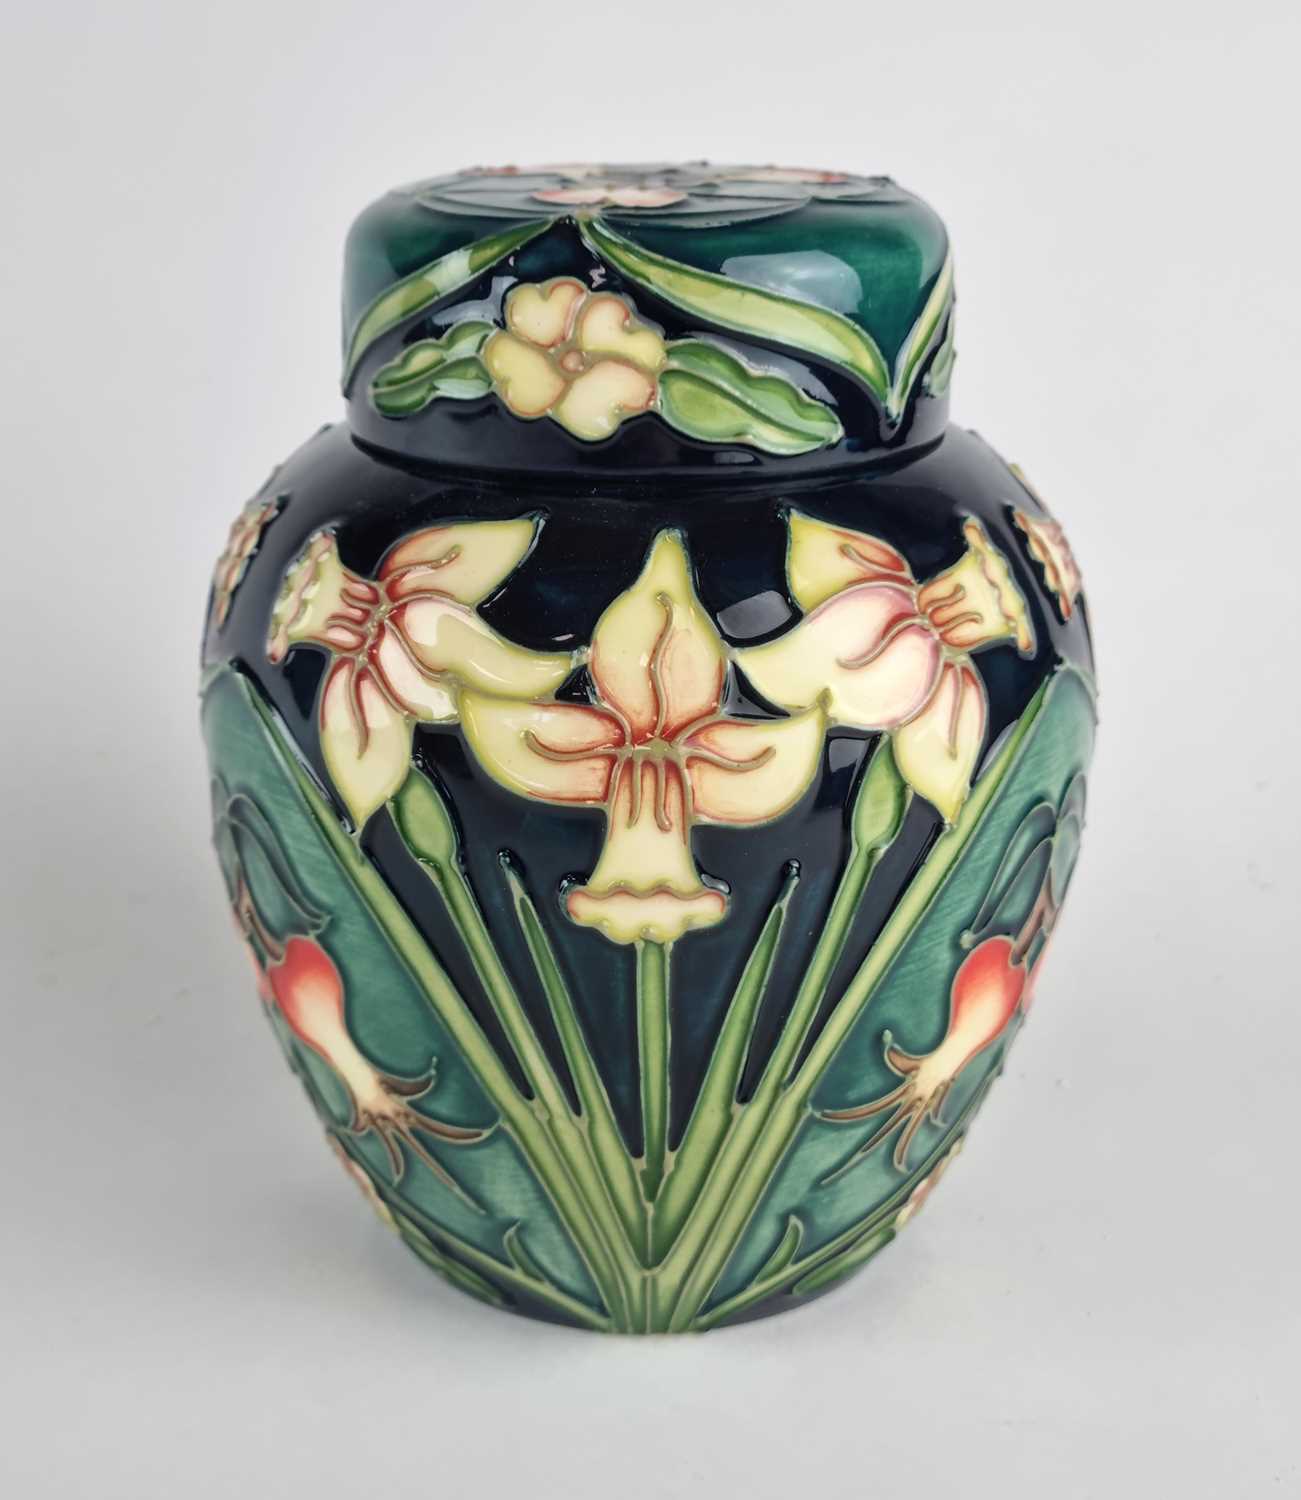 Lot Moorcroft 'Carousel' ginger jar and cover